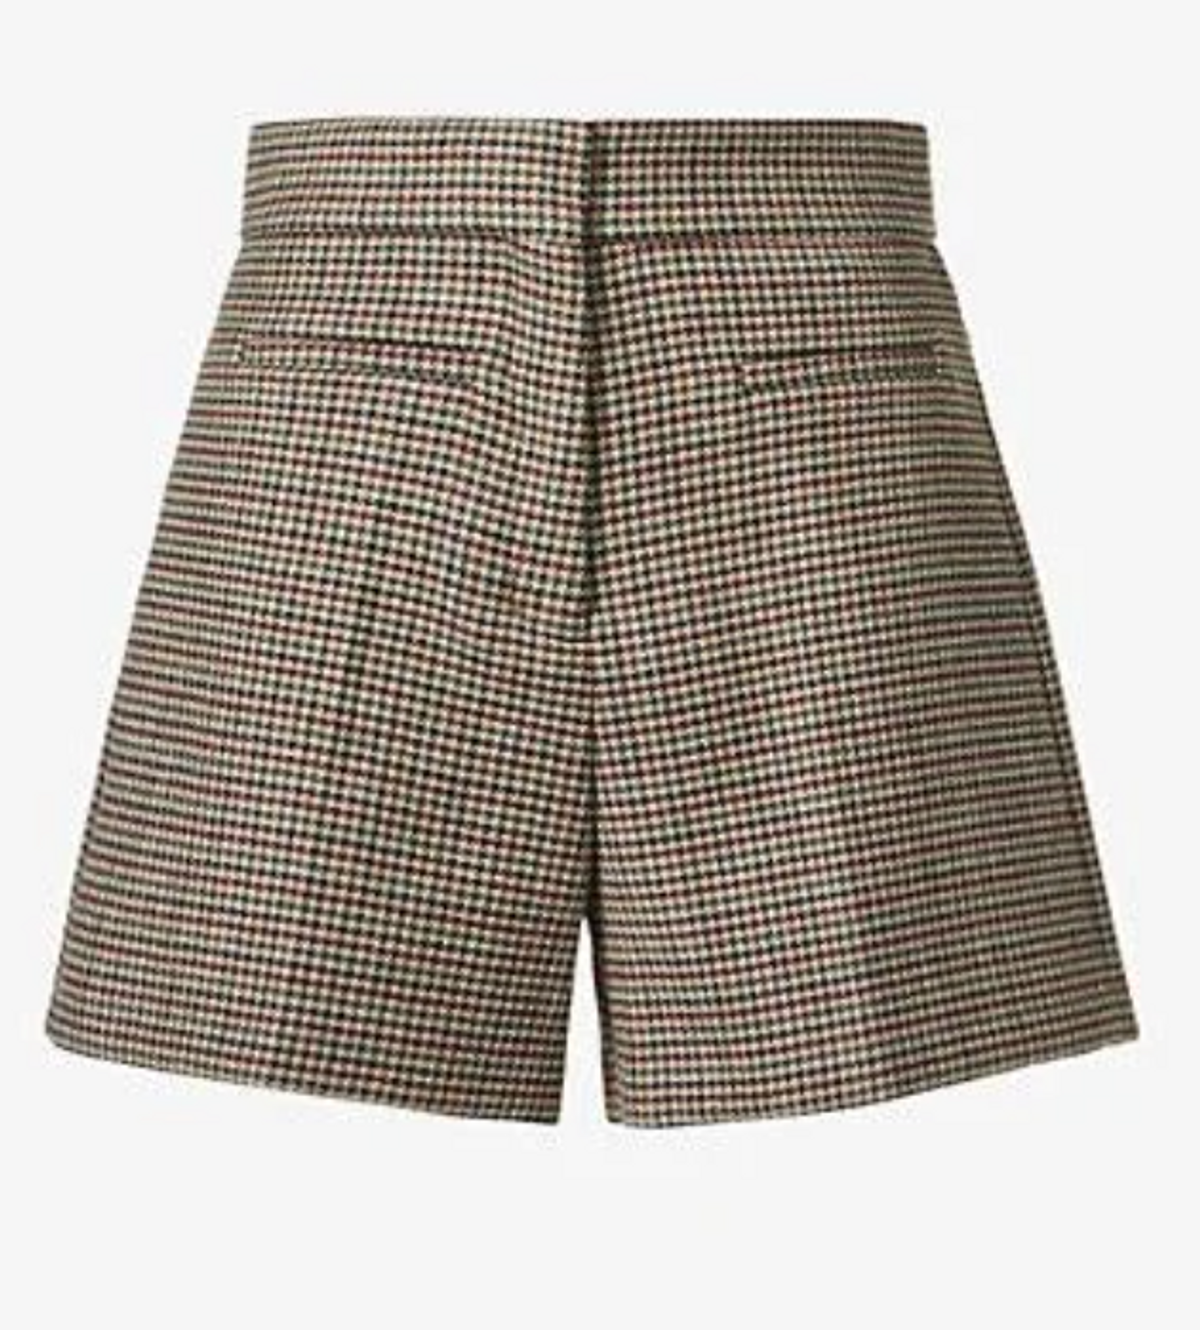 Houndstooth Wool Blend Shorts